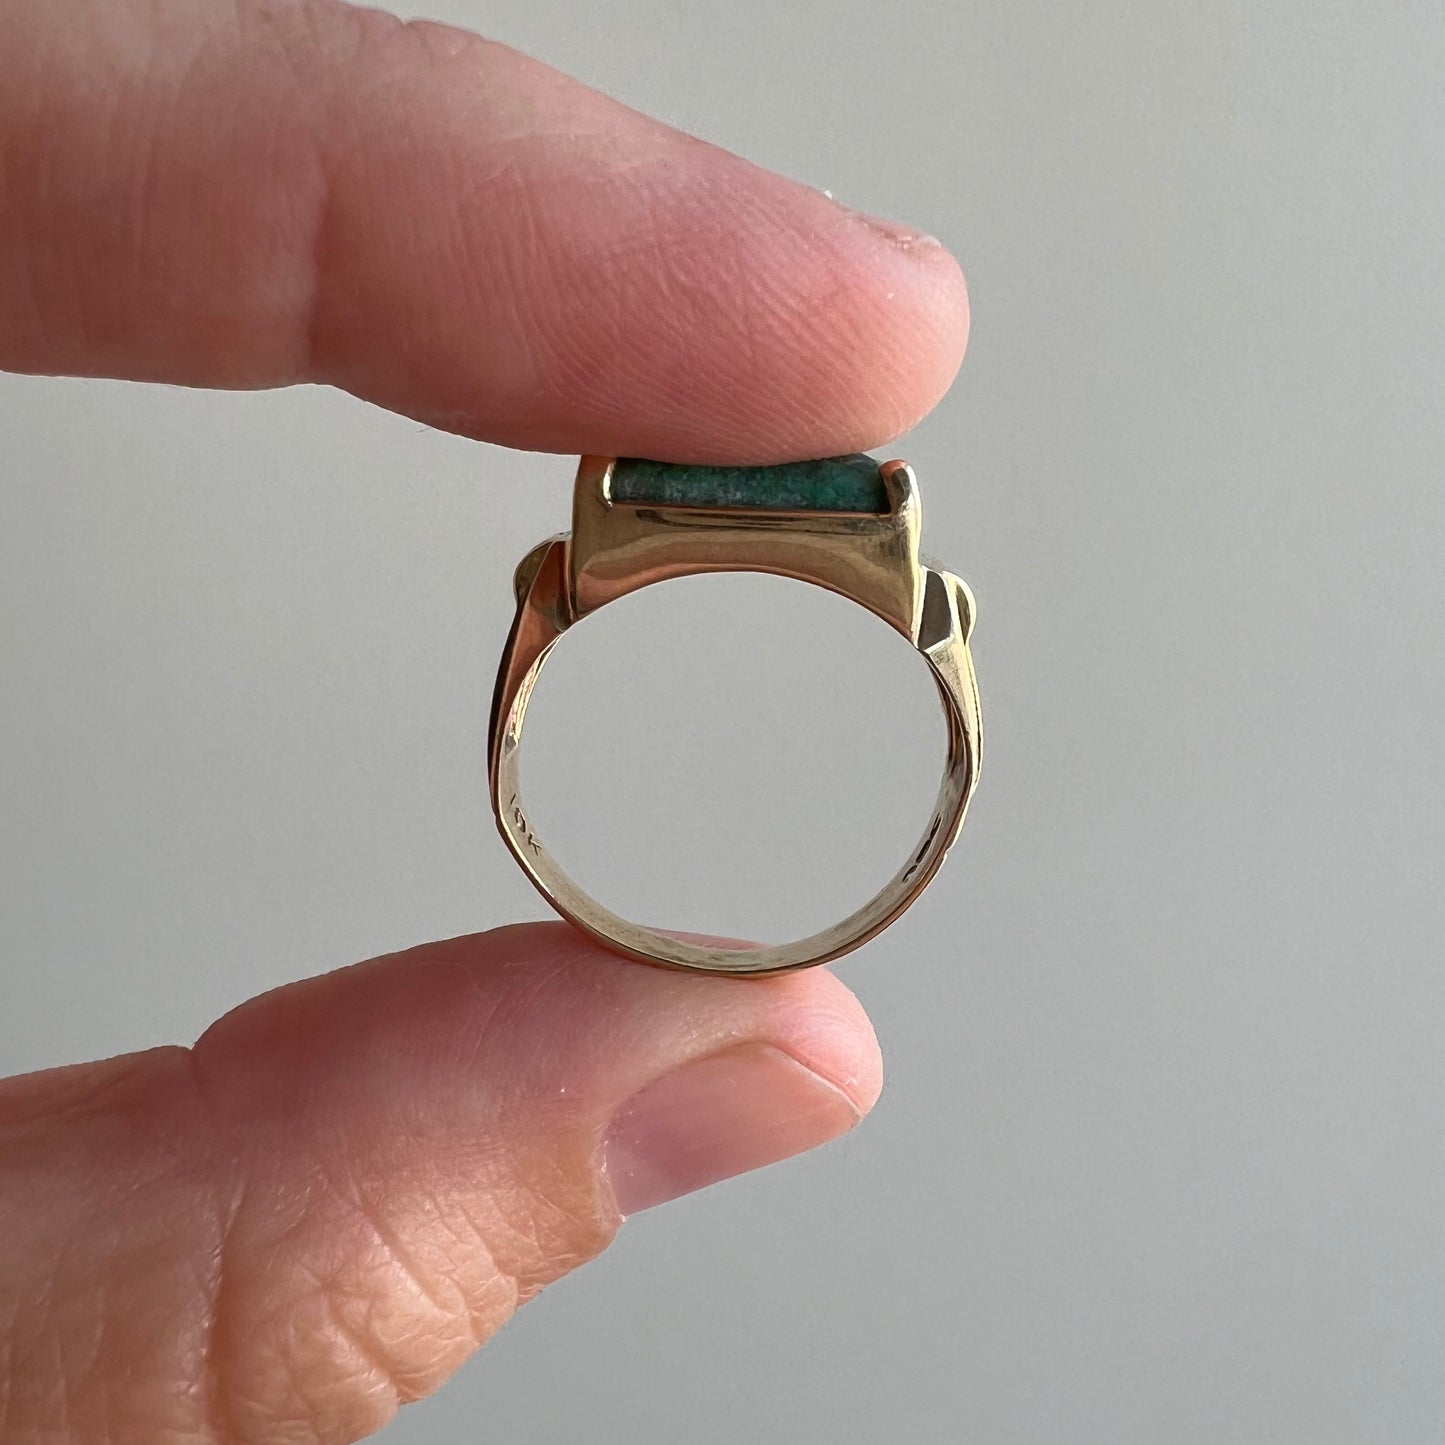 reimagined V I N T A G E // earthly plateau / 10k gold ring with a custom cut stone / fits like a size 6.75+